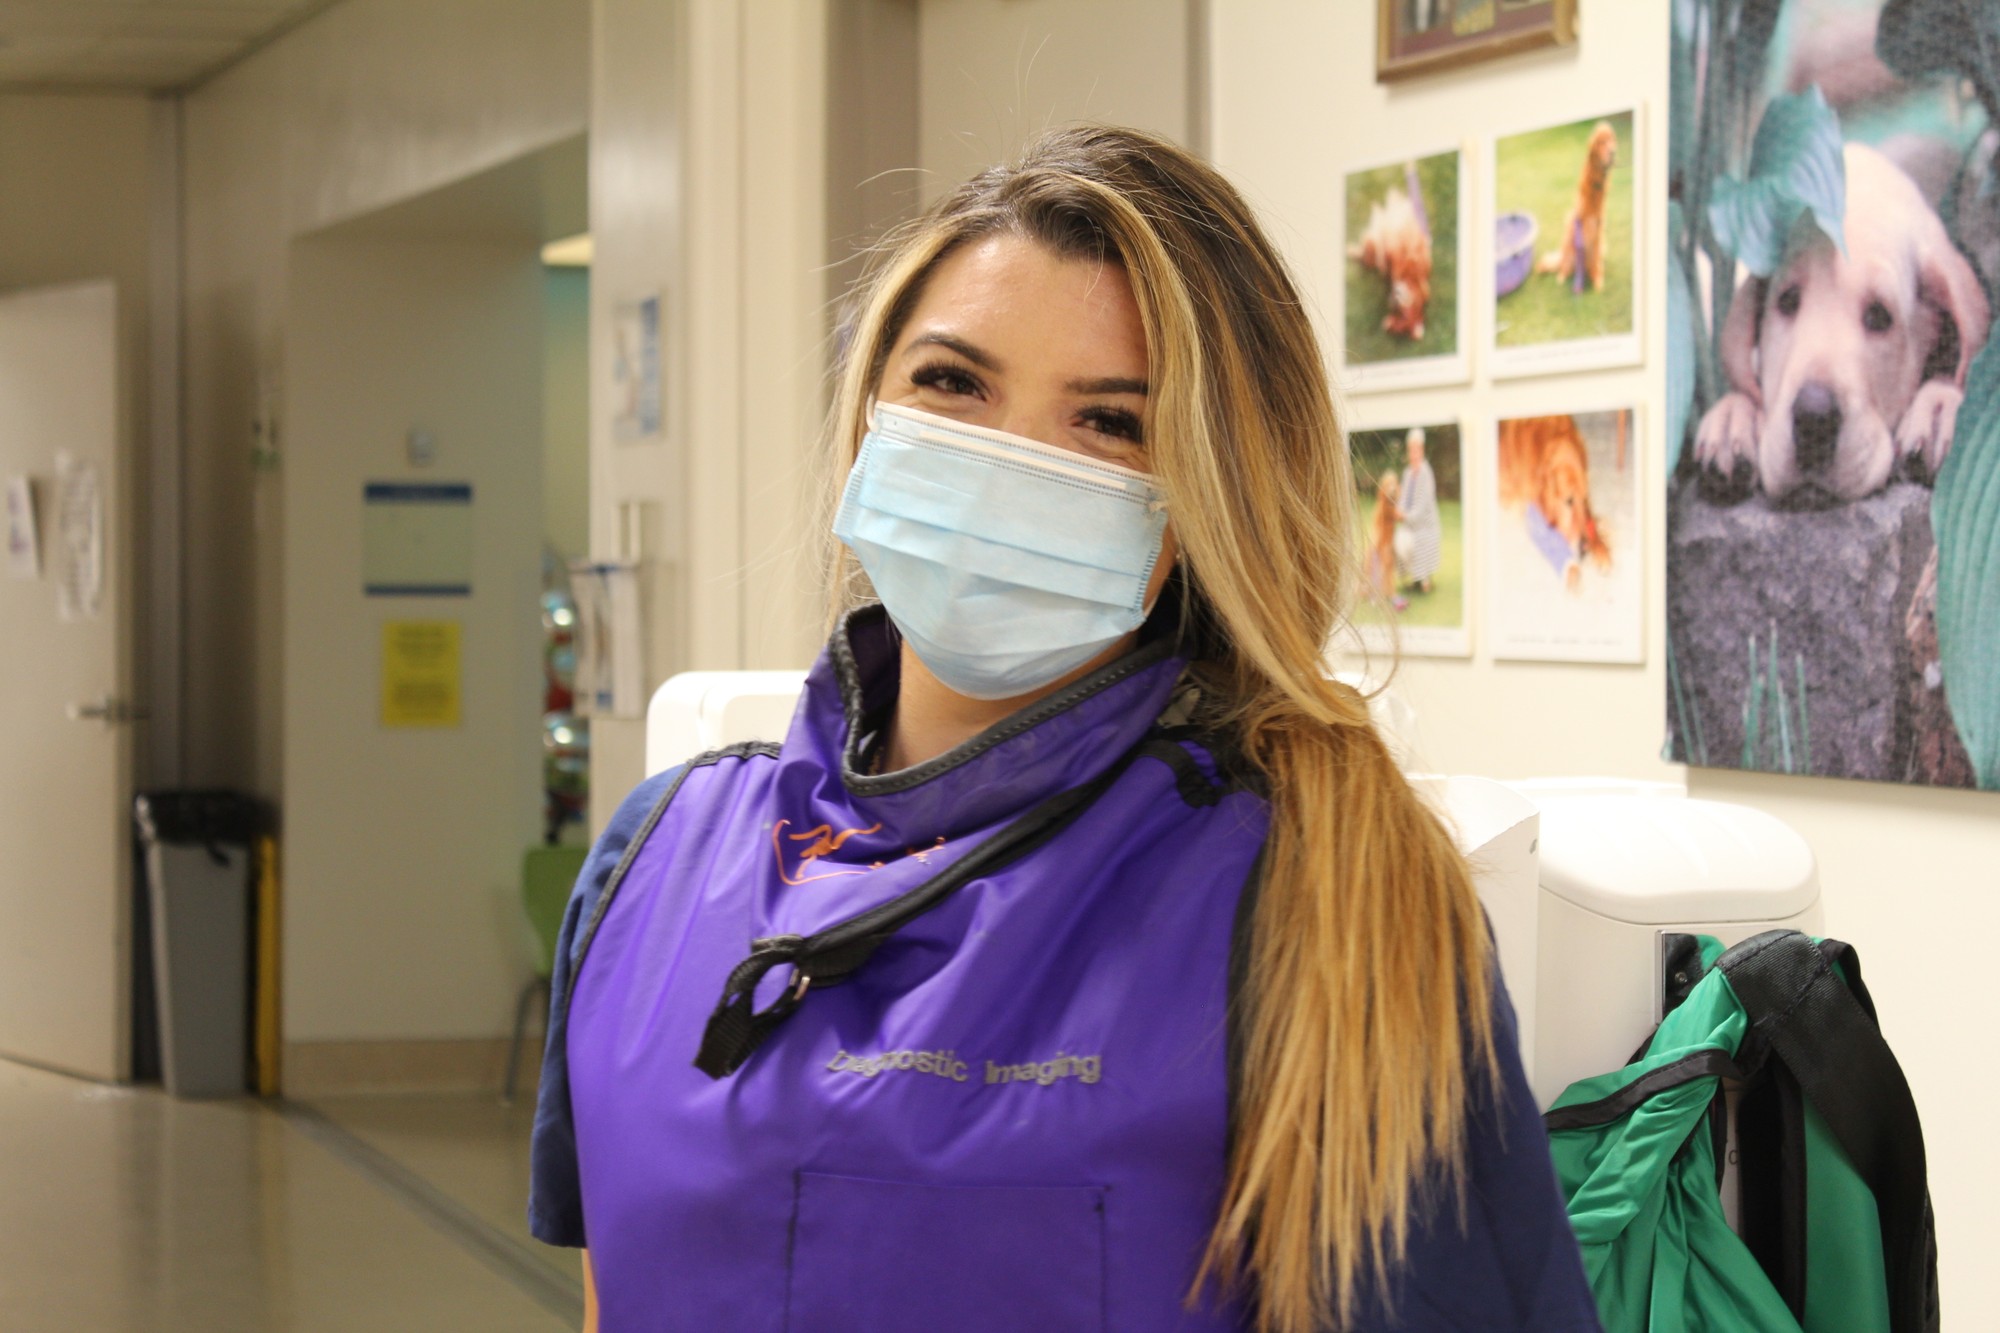 Rachel Houde, medical radiation technology student with Algonquin College, is doing her field placement at CHEO.